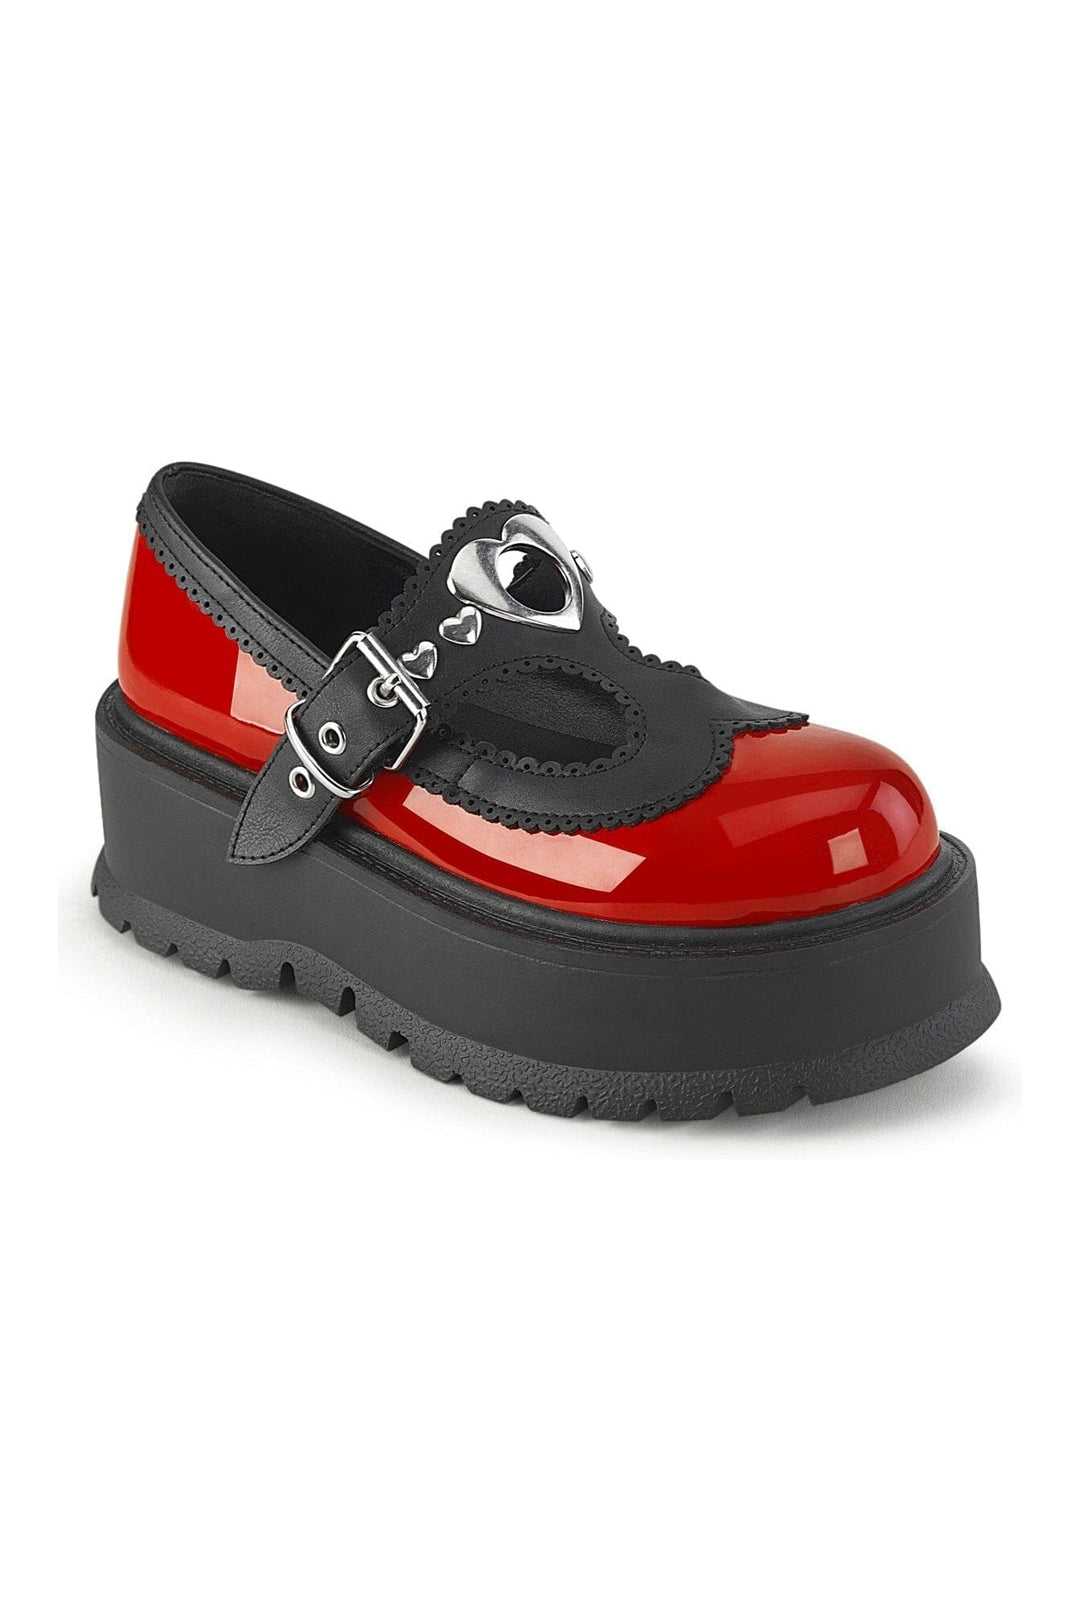 SLACKER-23 Red Vegan Leather Mary Janes-Mary Janes-Demonia-Red-10-Vegan Leather-SEXYSHOES.COM